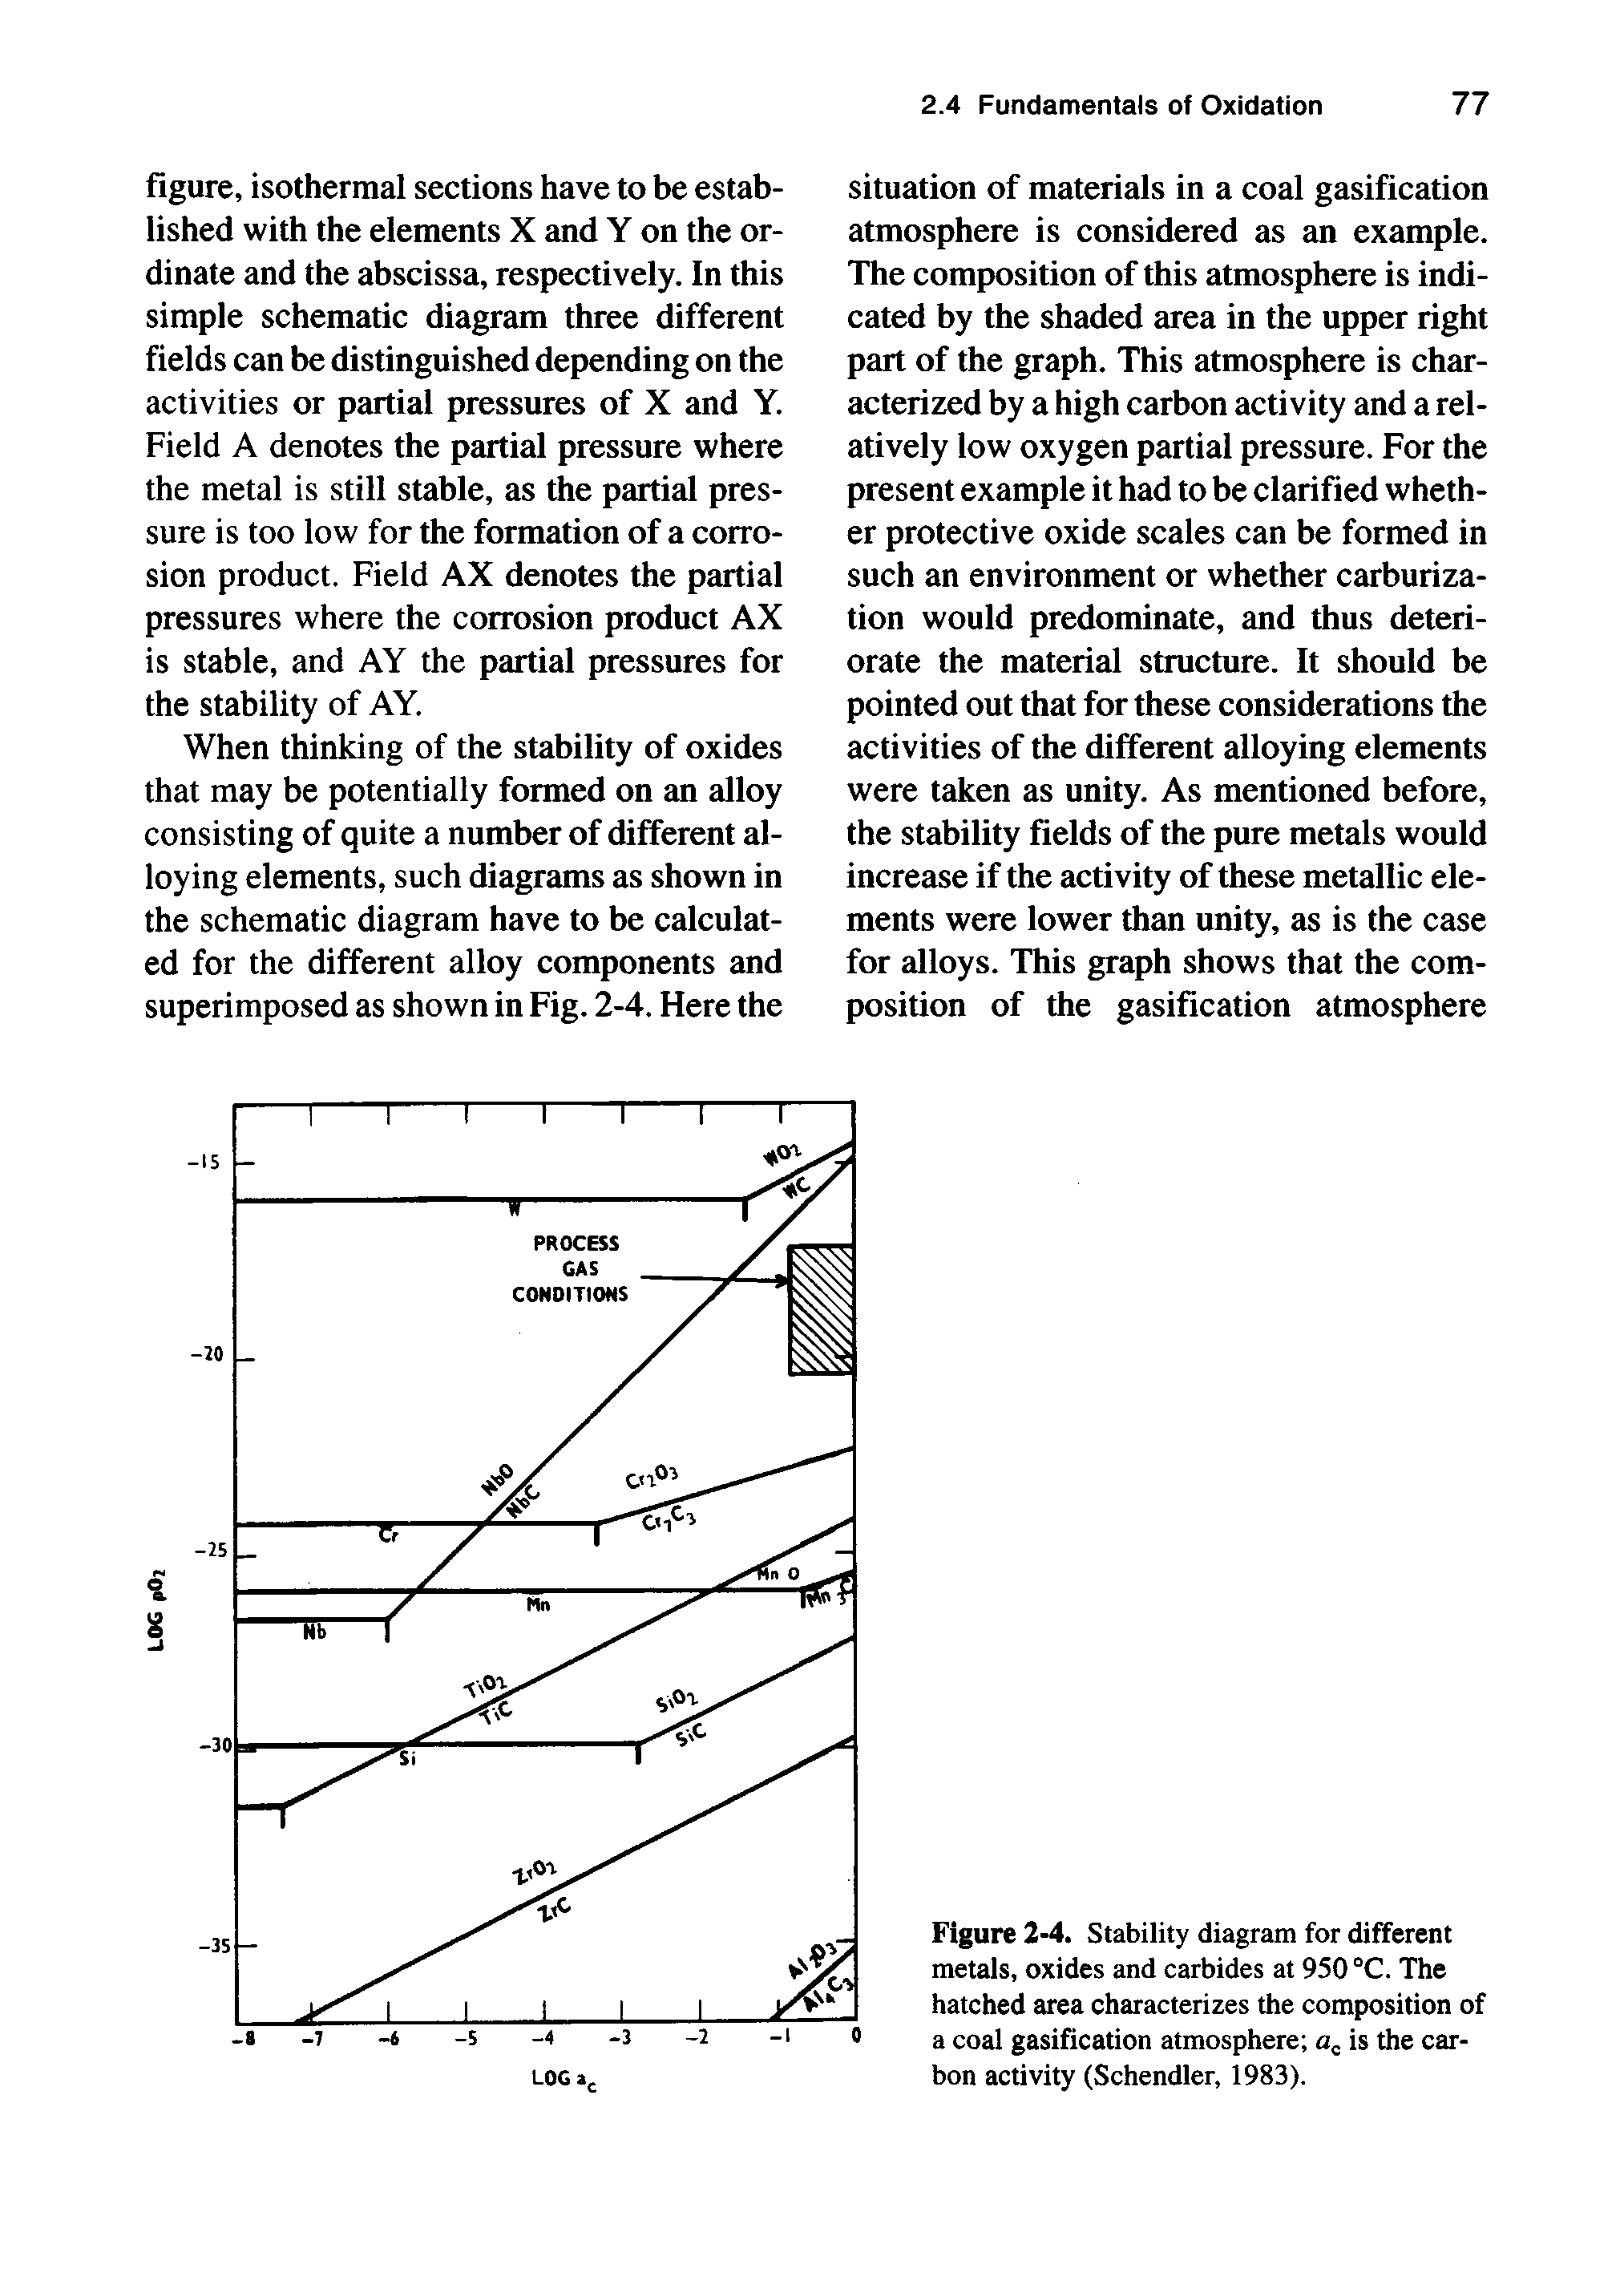 Figure 2-4. Stability diagram for different metals, oxides and carbides at 950 °C. The hatched area characterizes the composition of a coal gasification atmosphere is the carbon activity (Schendler, 1983).